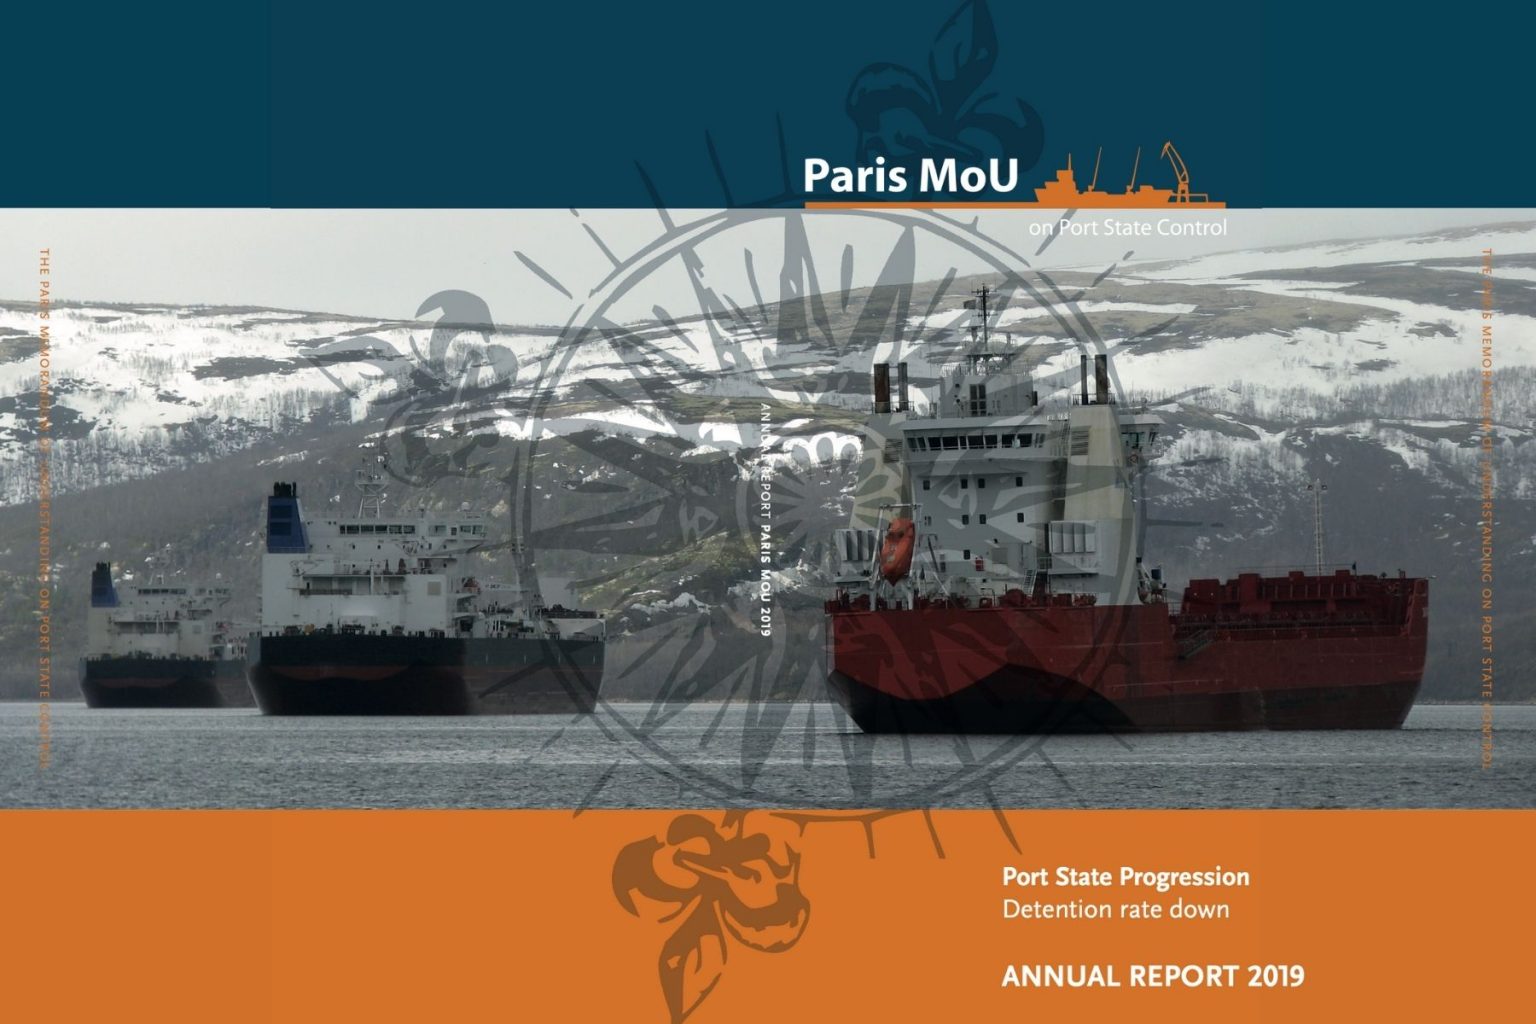 Paris MoU on Port State Control Annual Report 2019